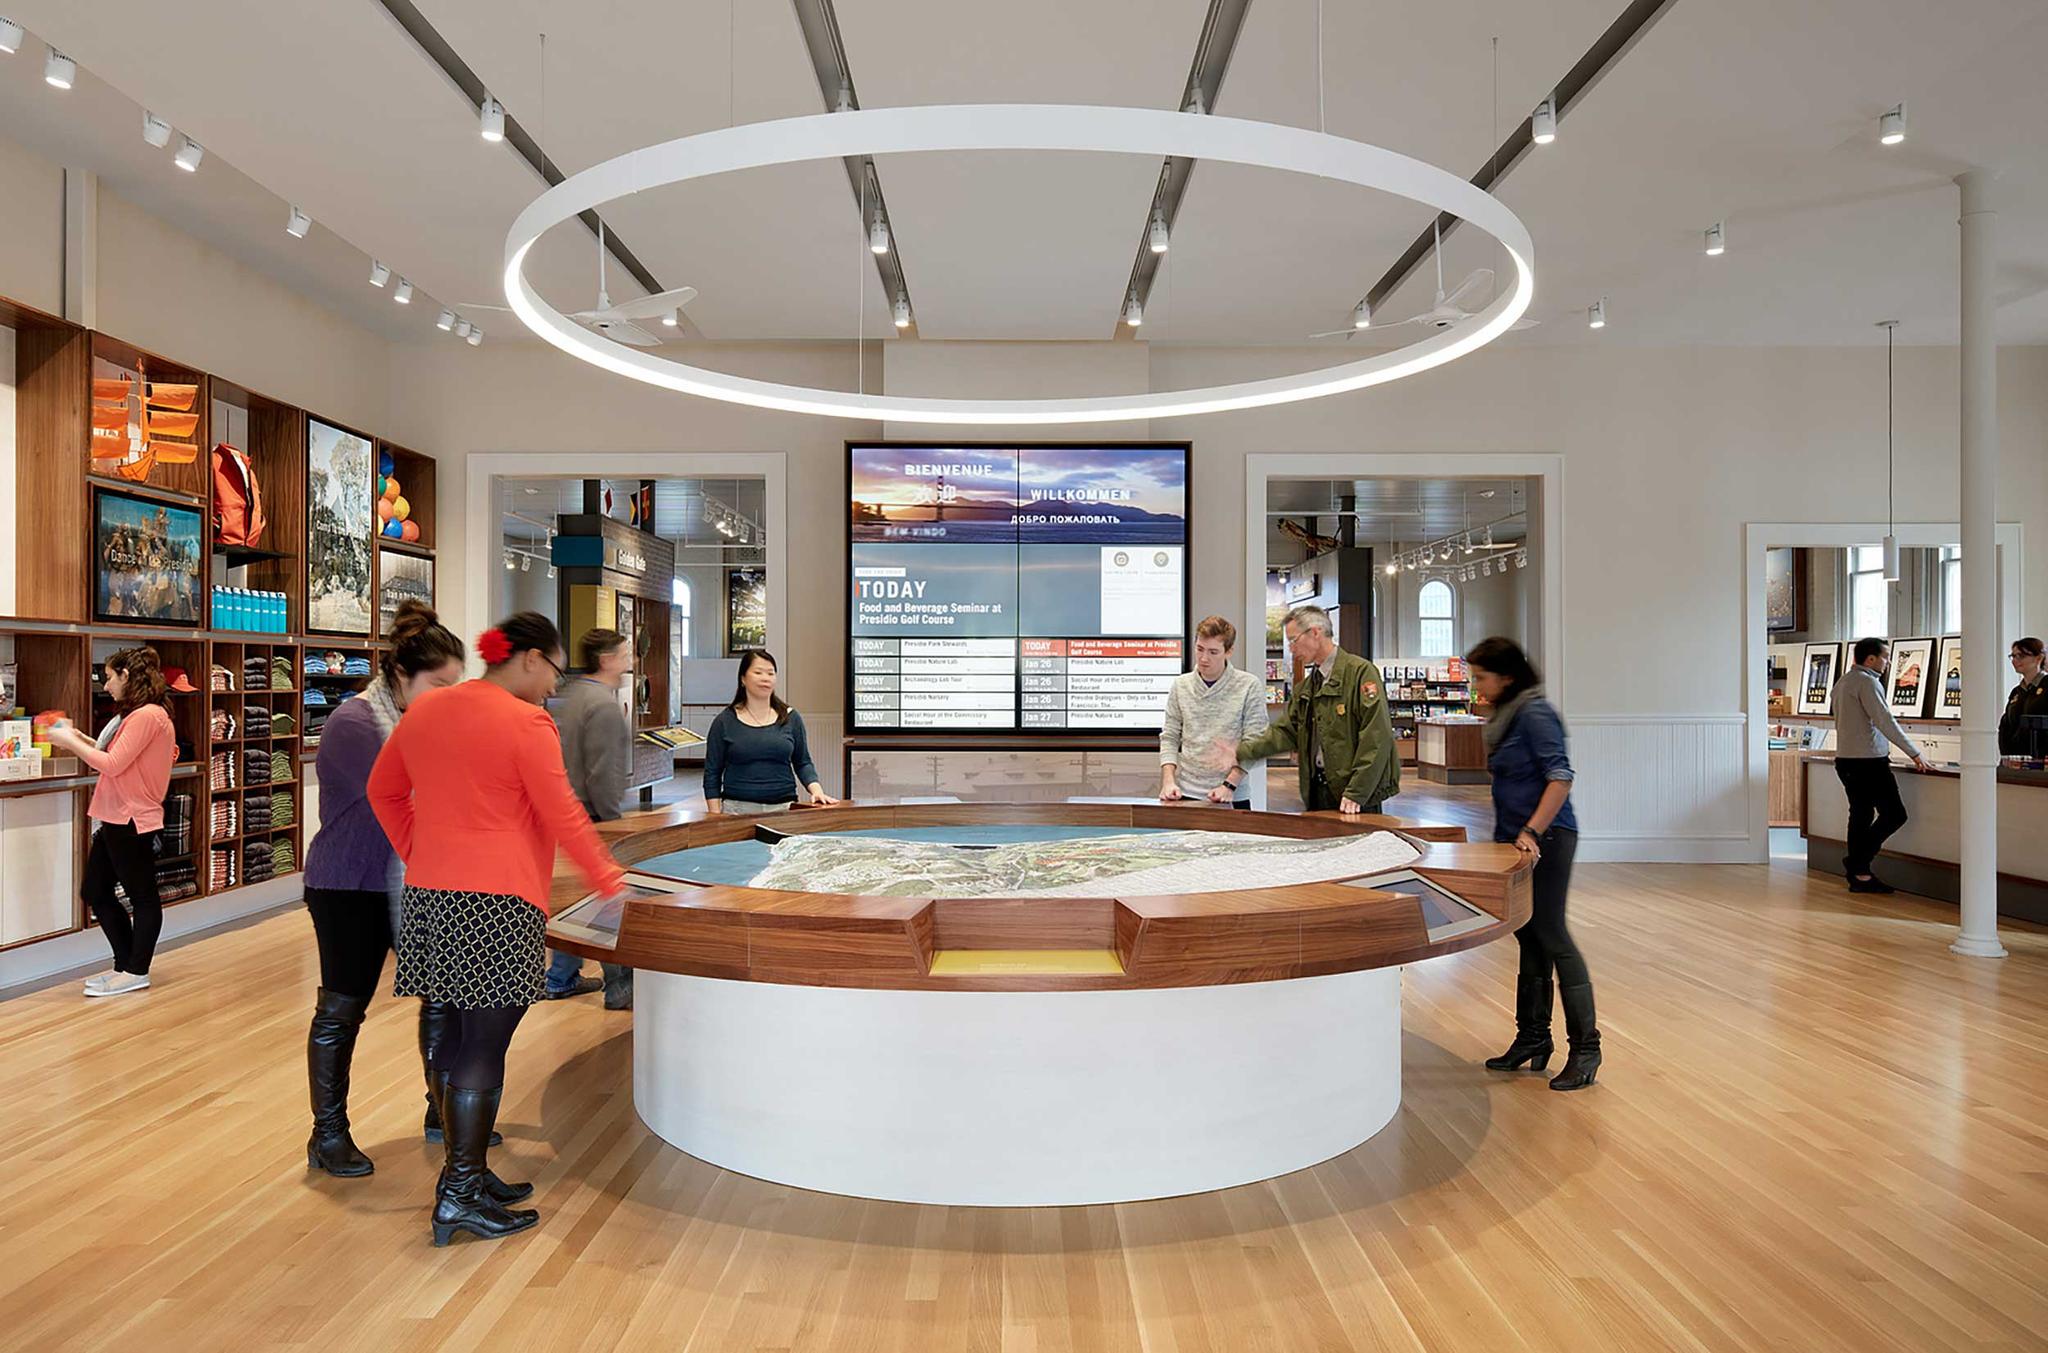 Interior of the Presidio Visitor Center, with people viewing a large Presidio model. Photo by Matthew Millman.